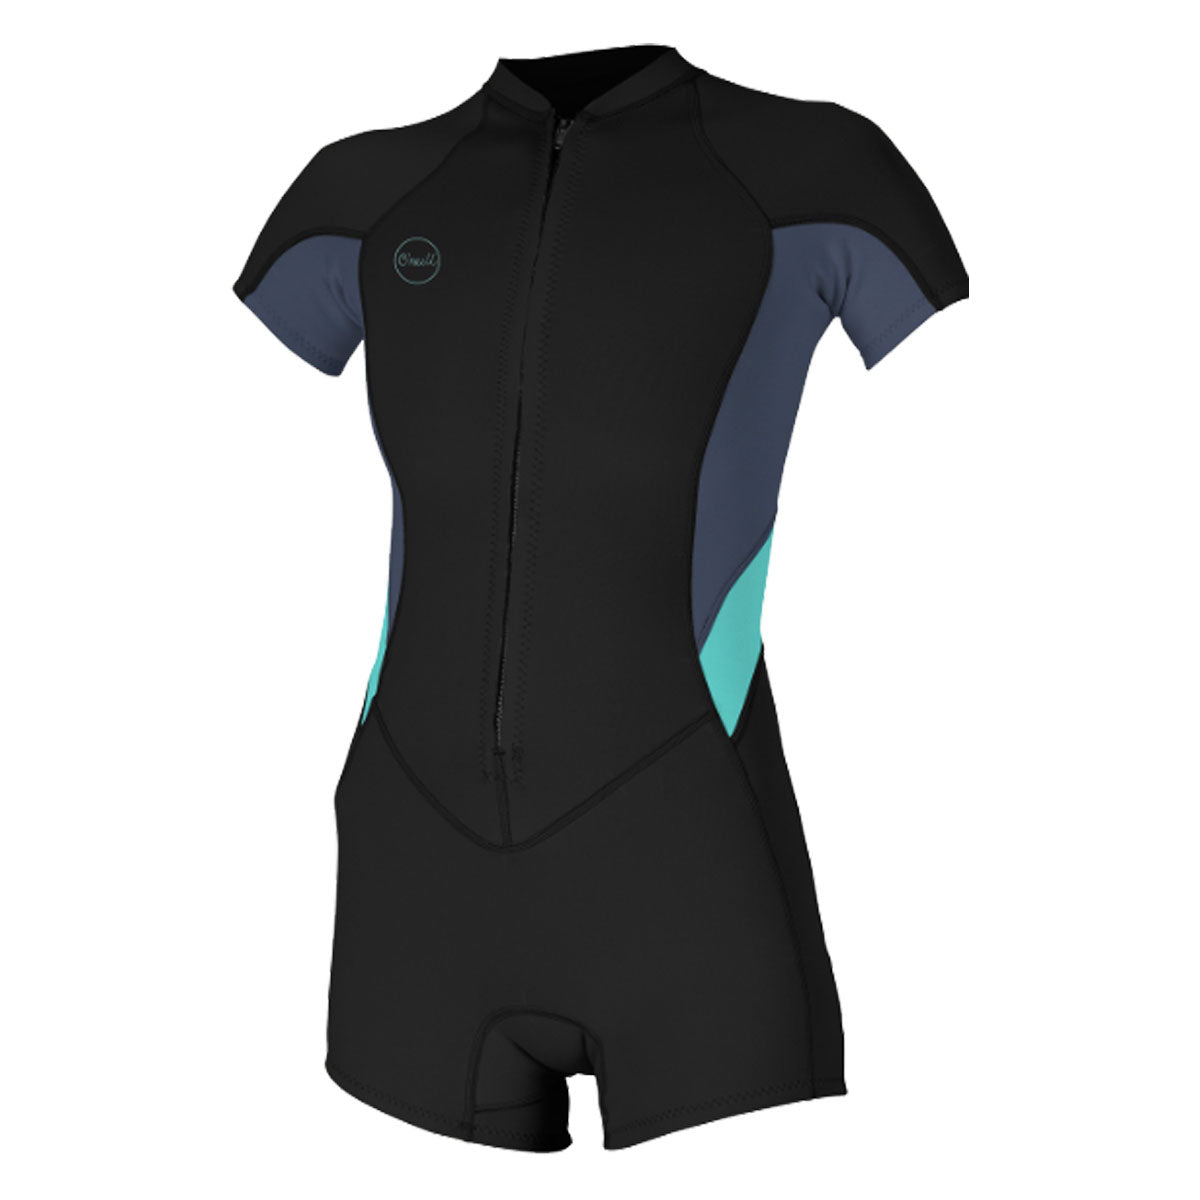 The O'Neill Women's Bahia 2/1 S/S Front Zip Spring Suit line offers a stylish and functional option for performance-driven athletes, featuring a sleek combination of black and turquoise.